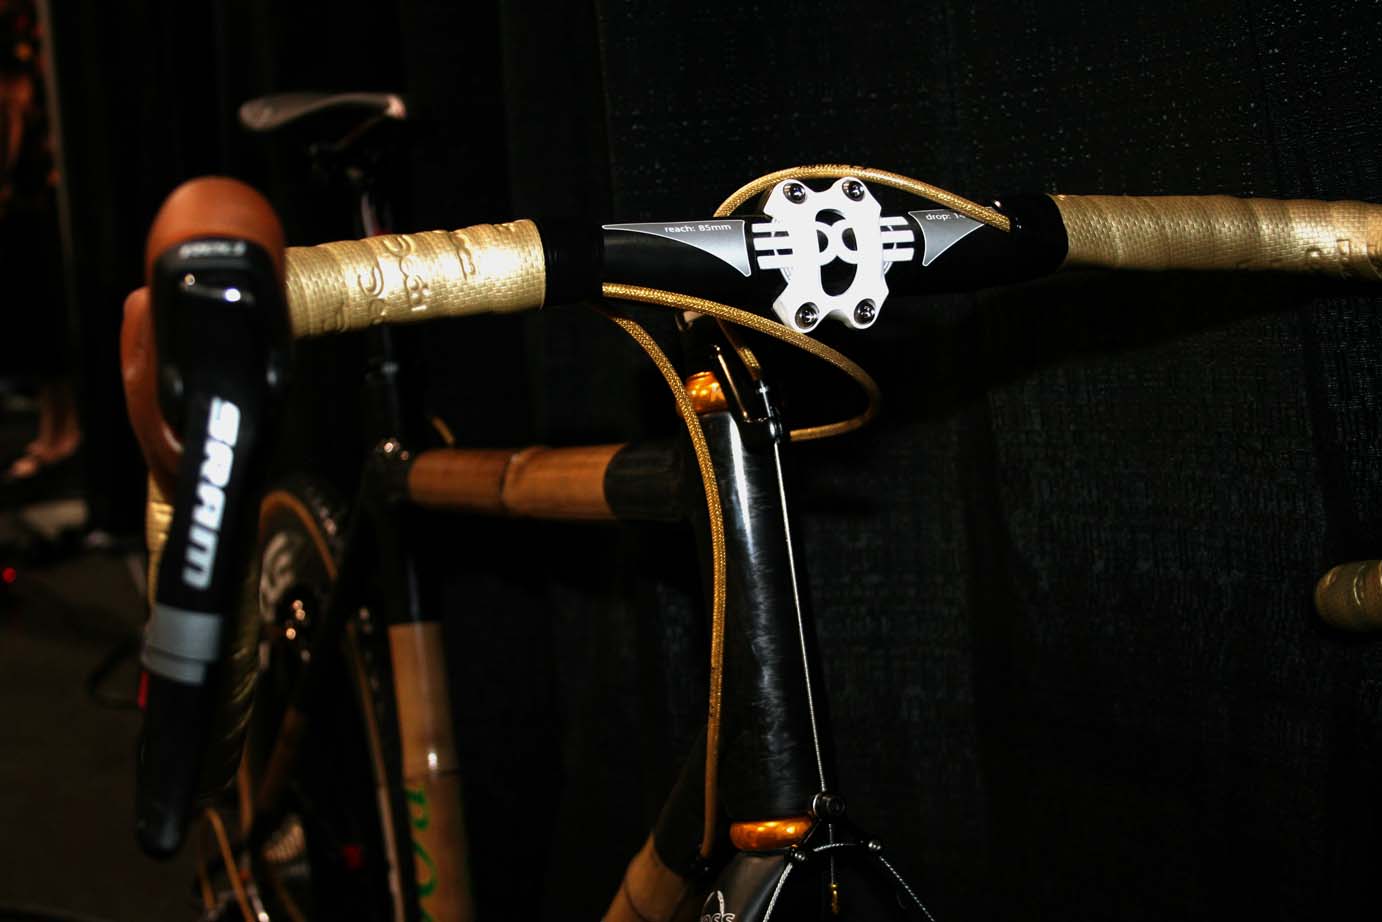 Boo\'s hand-made, bamboo and carbon cyclocross bike at Interbike 